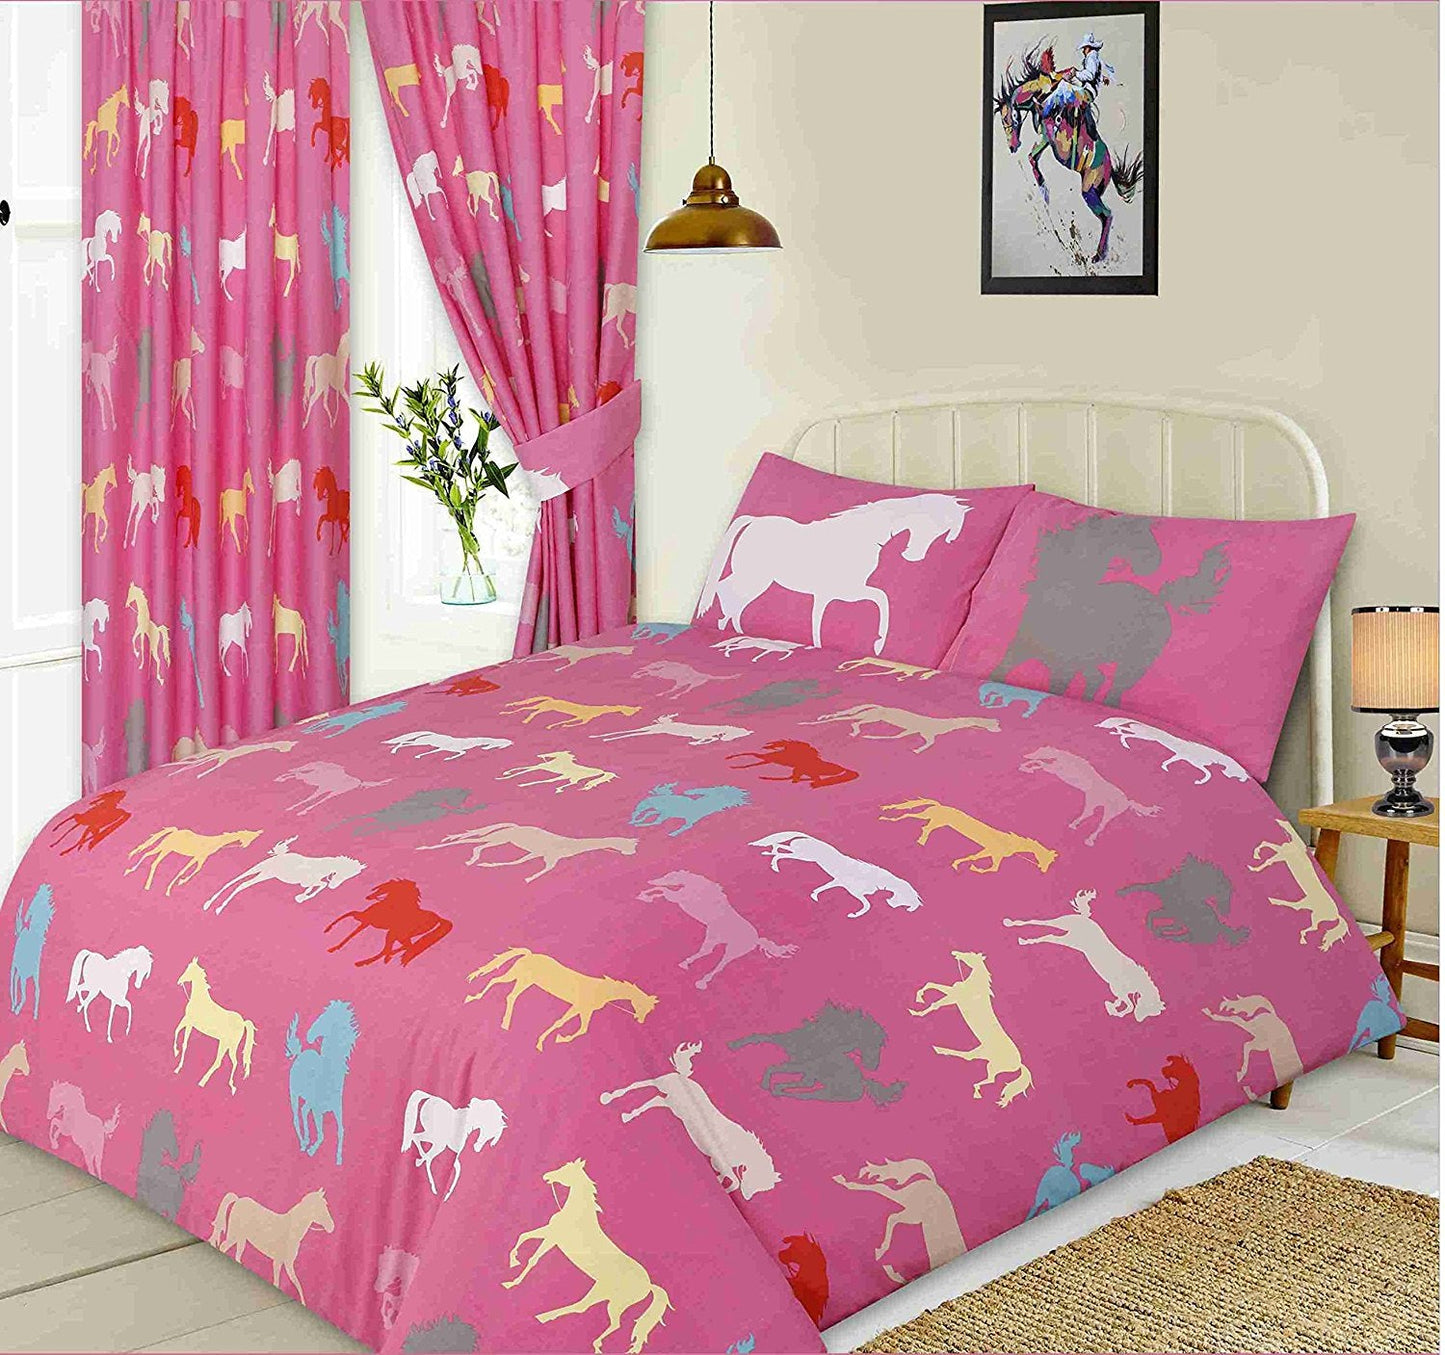 Single Bed Size Duvet Cover Set Horses Equestrian Pink Teal Yellow White Grey